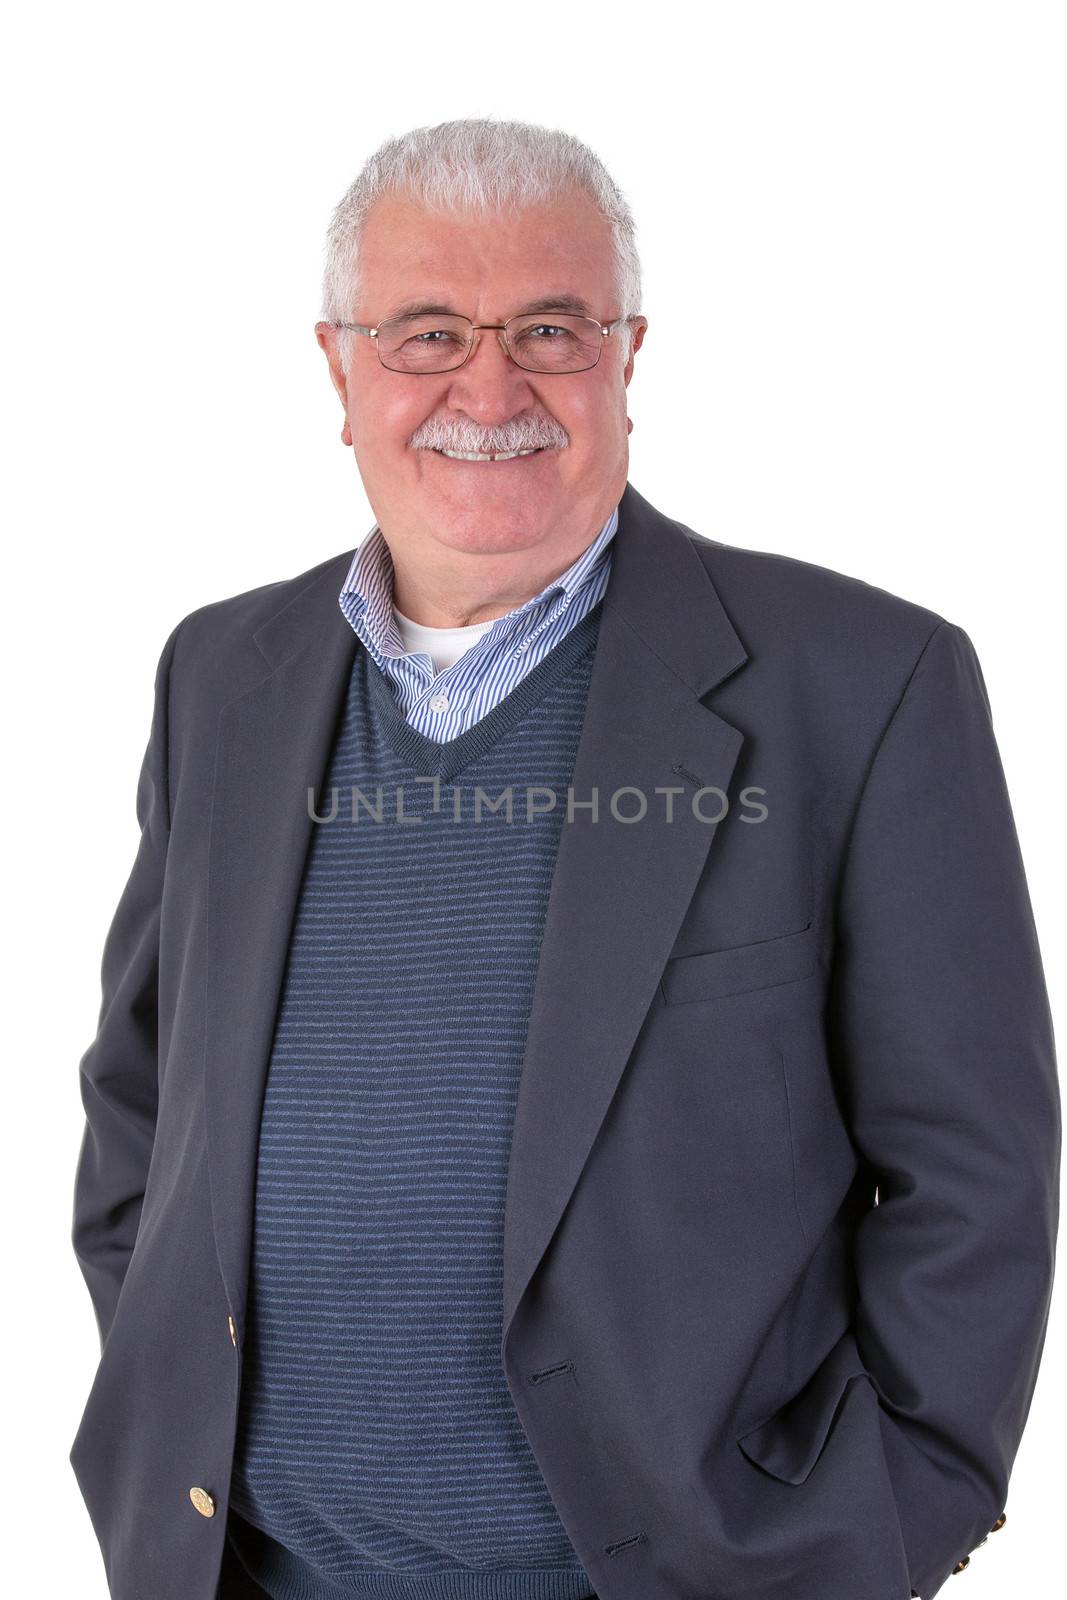 White hair senior adult with mustache looking at you smiling and satisfactorily with his glasses wearing dark blue suit